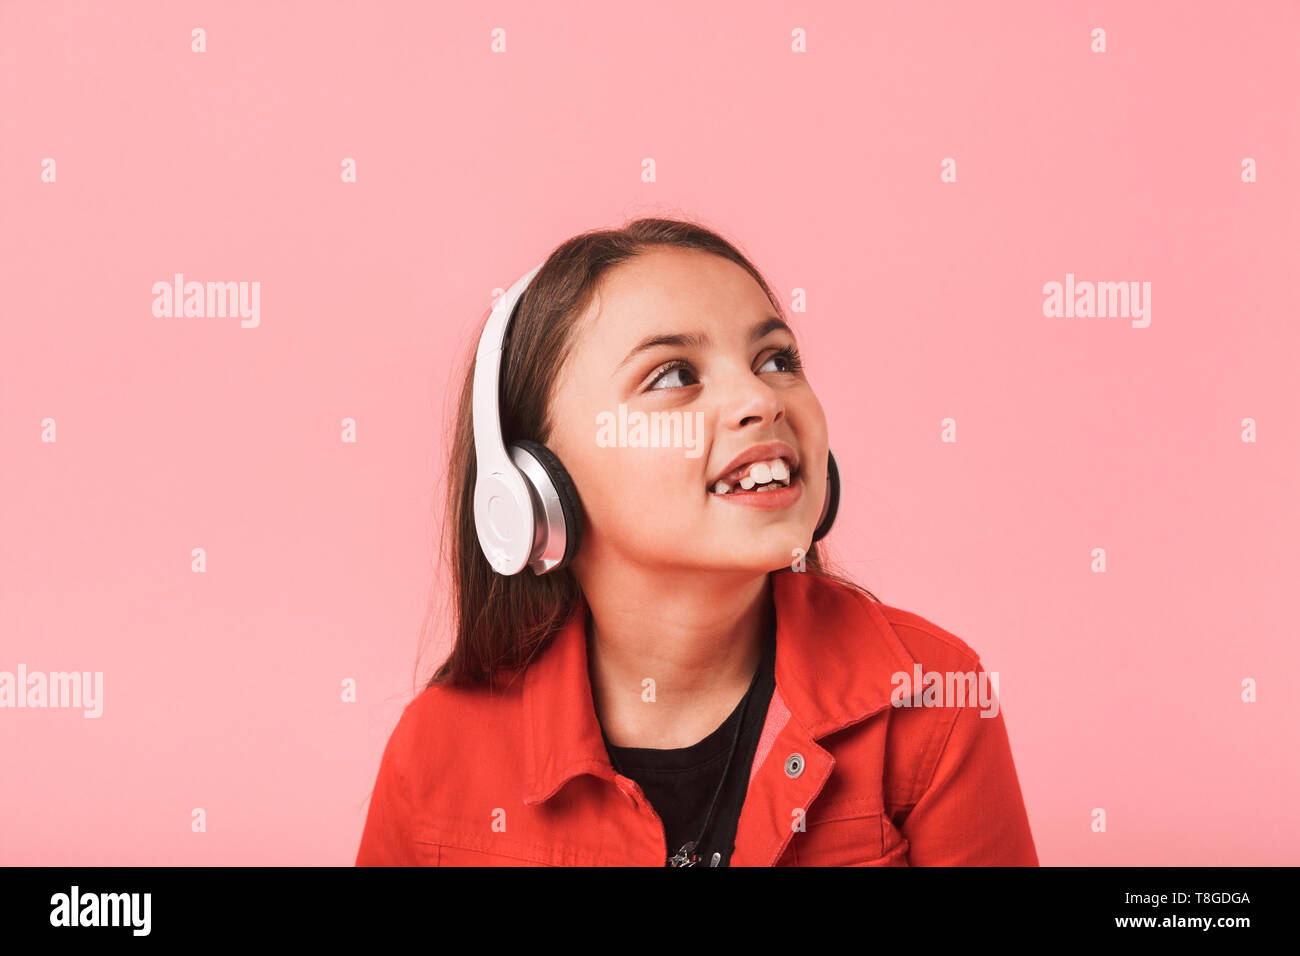 Image of european little girl in casual wearing headphones listening to music isolated over red background Stock Photo